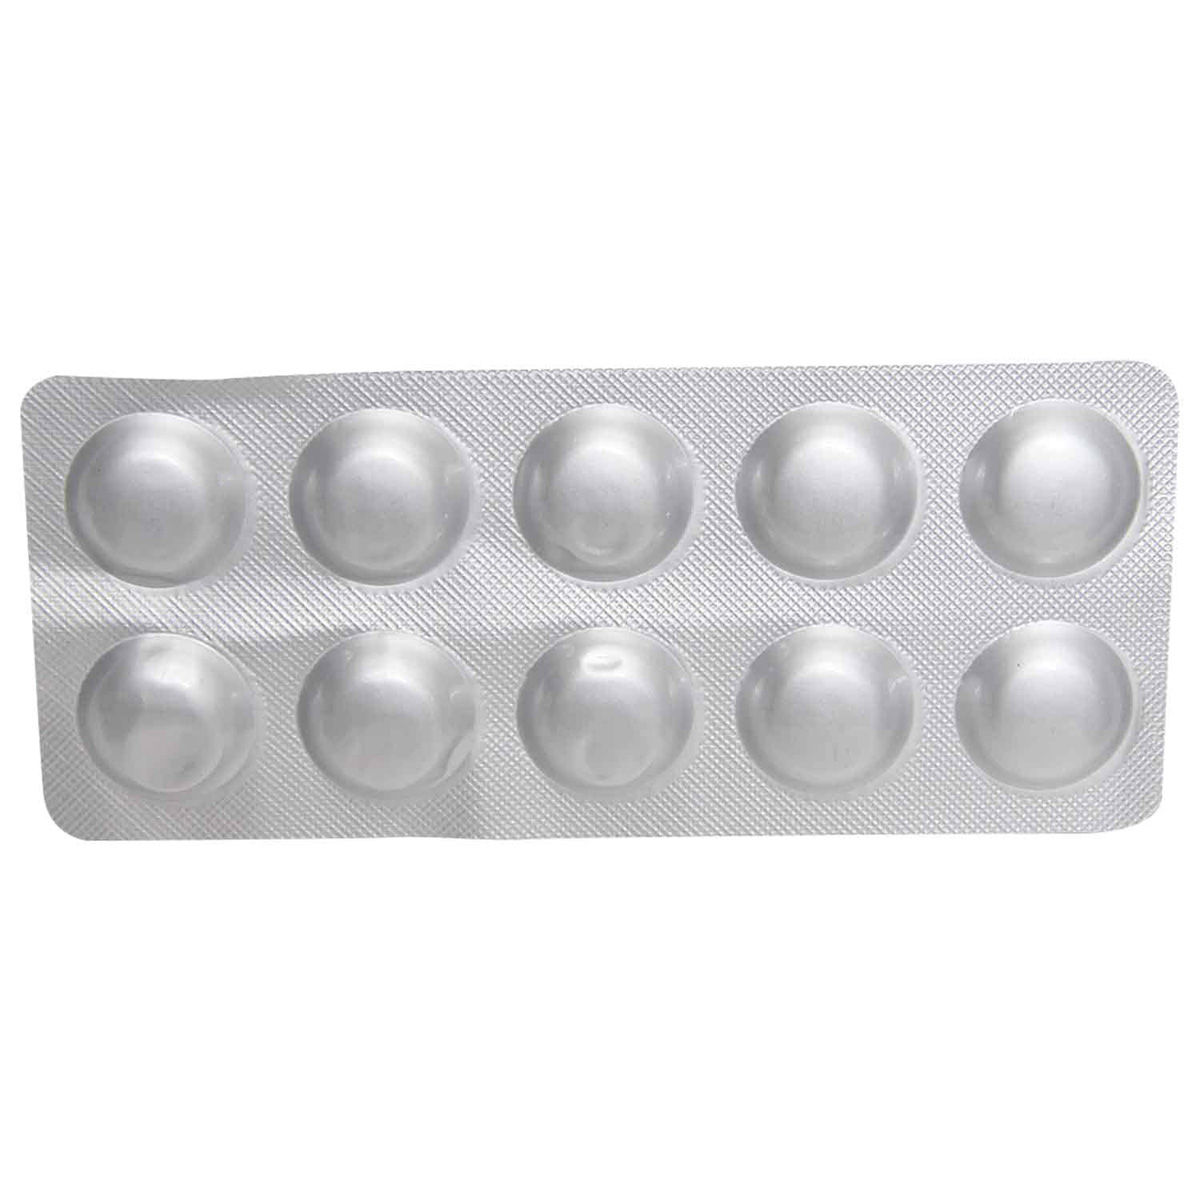 Telday-80 Tablet 10's, Pack of 10 TABLETS